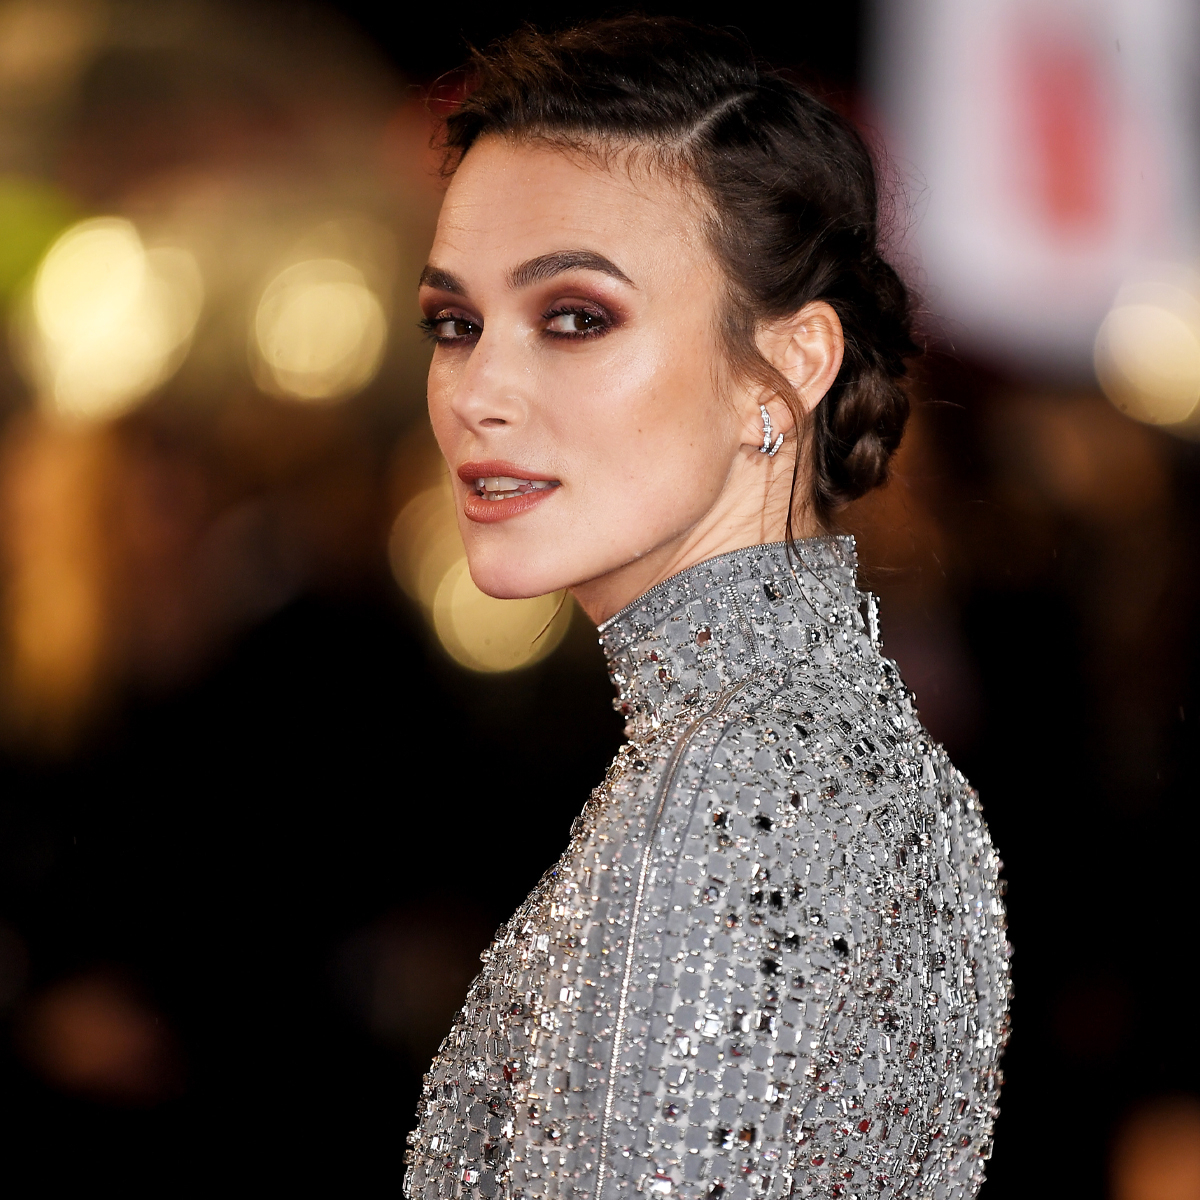 Keira Knightley on Nudity + Working With Male Directors